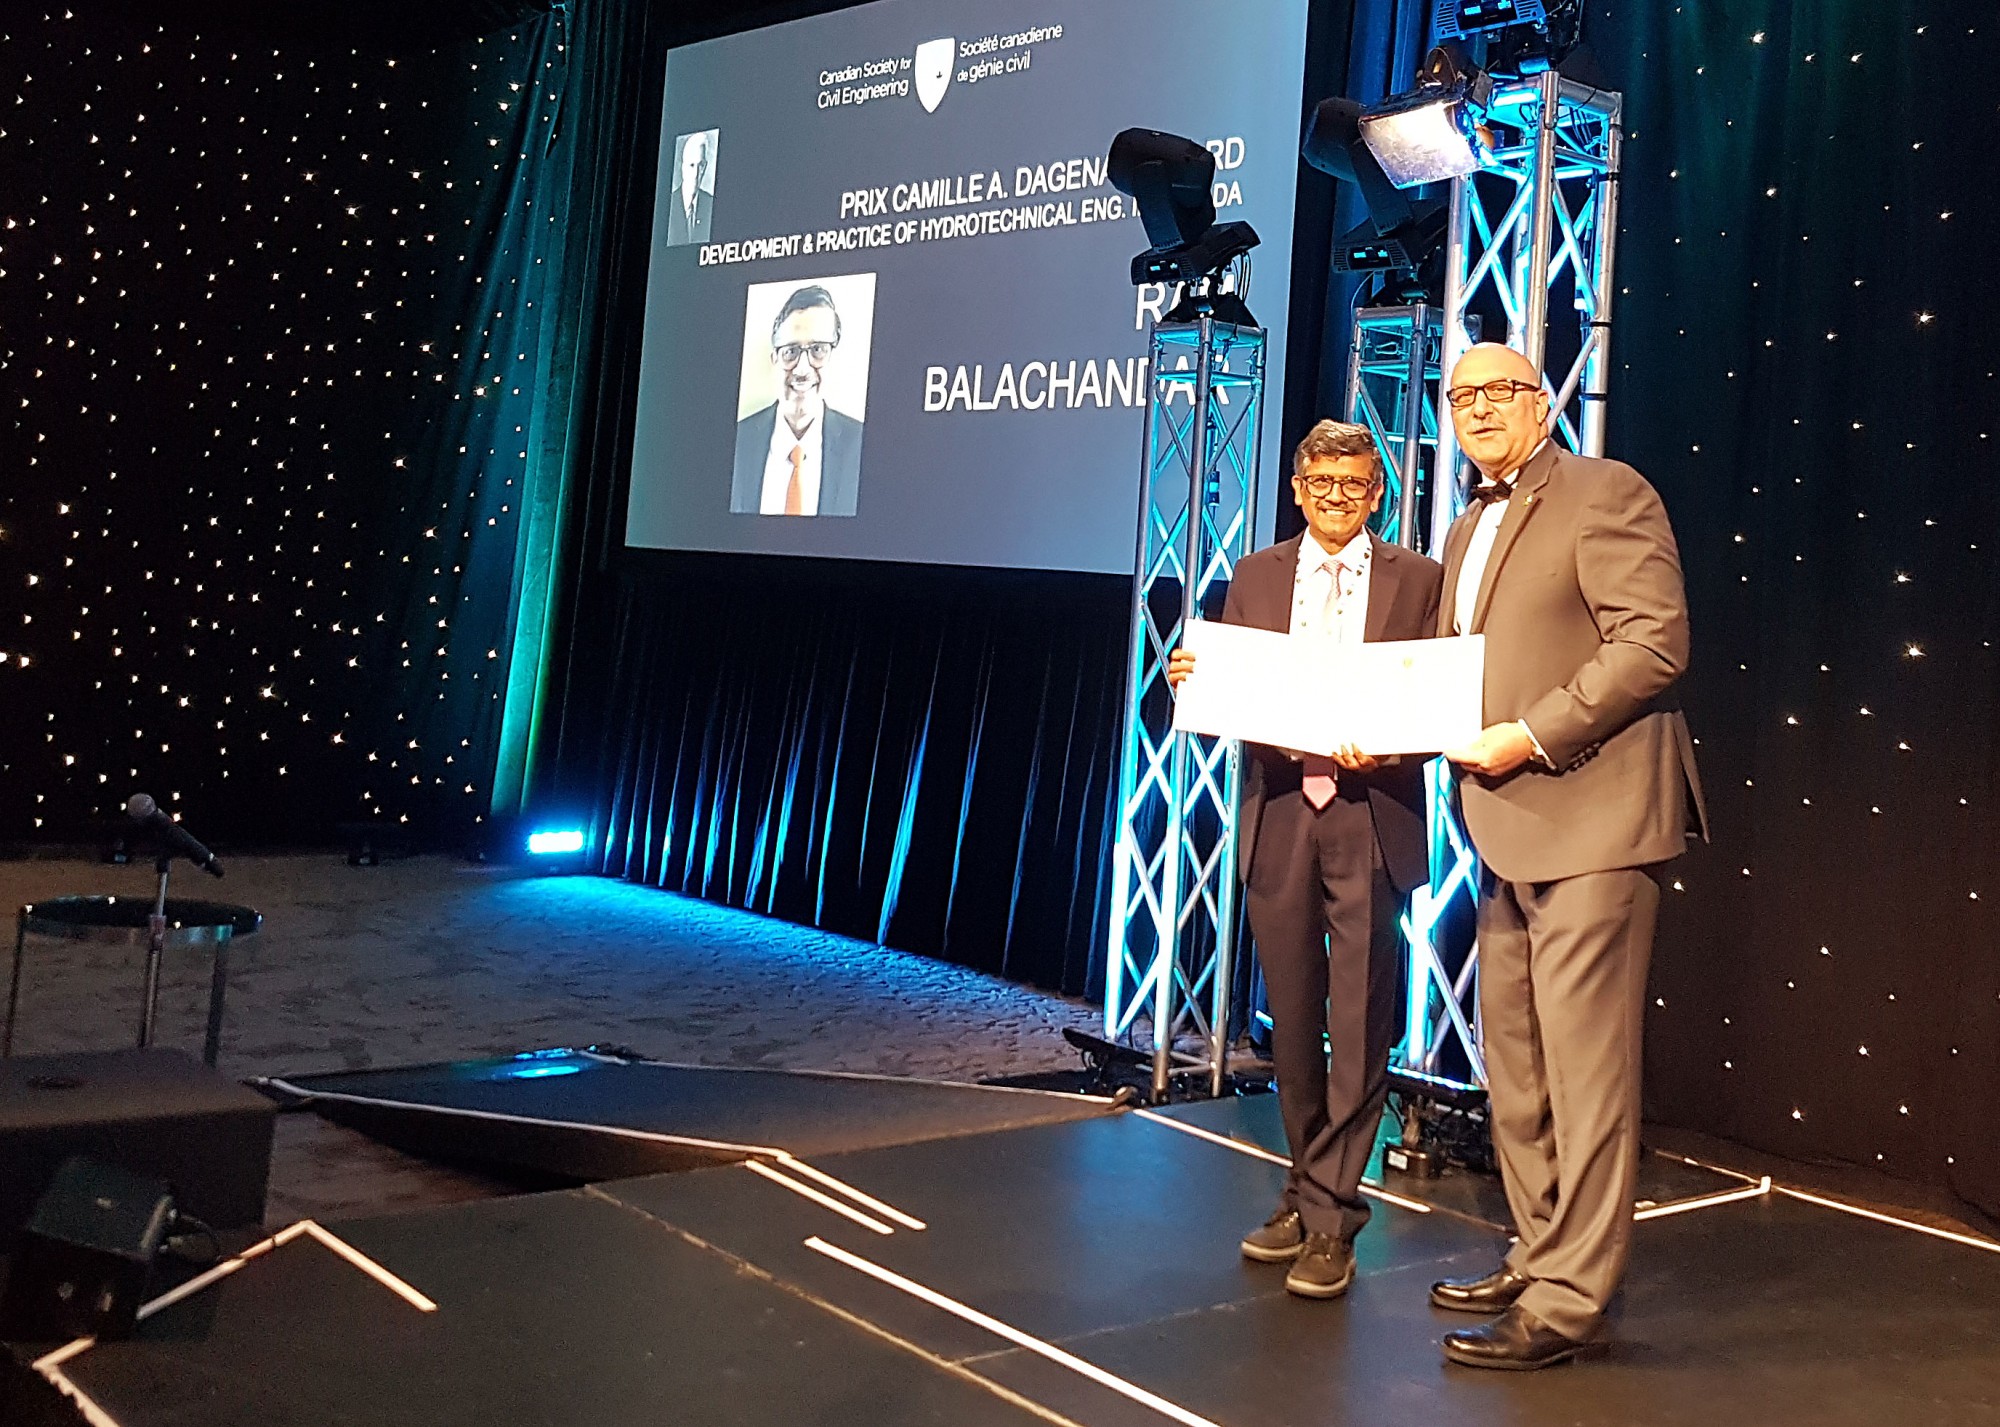 Dr. Ram Balachandar has been recognized for his “outstanding” contributions